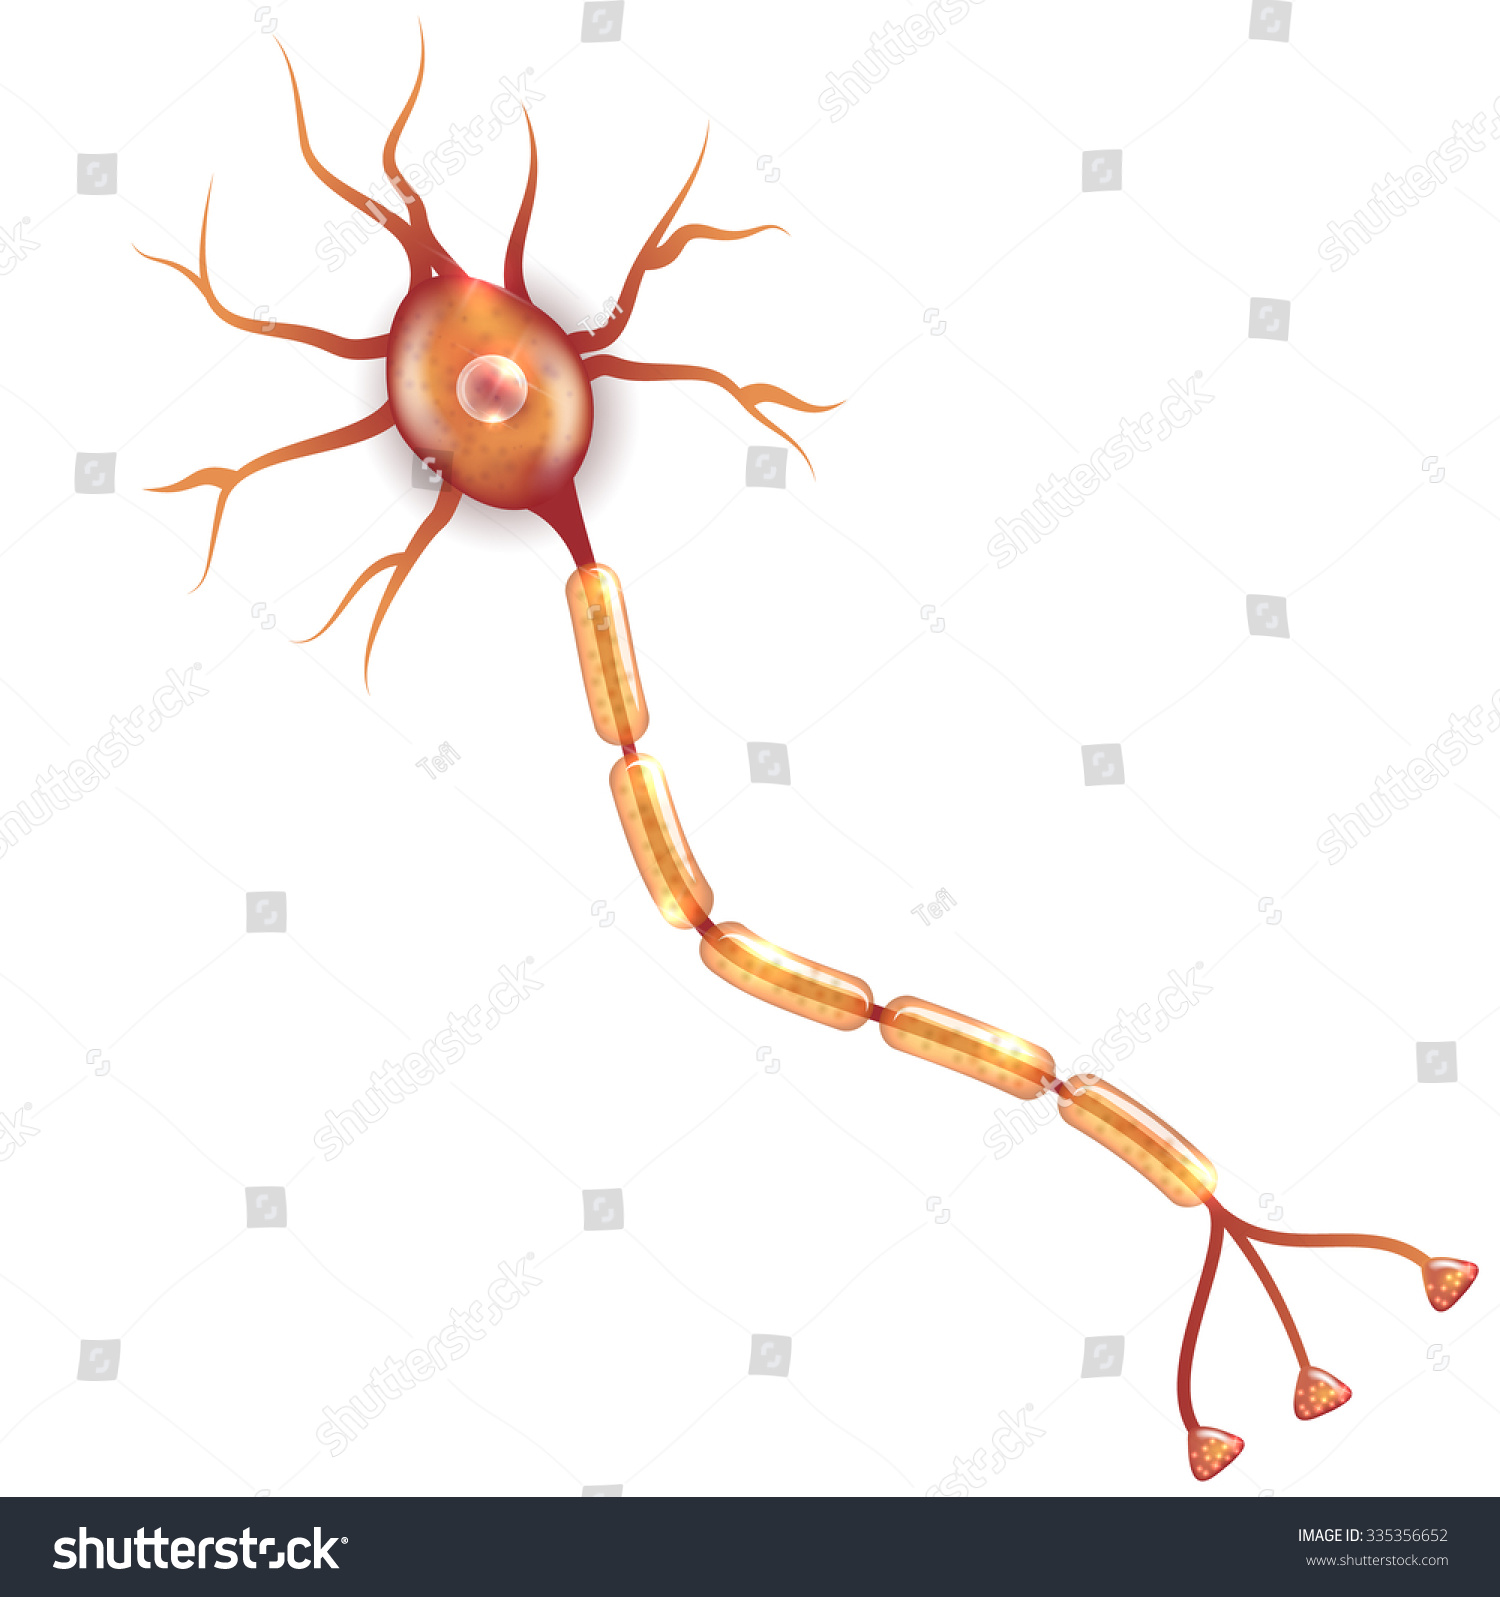 SVG of Neuron that is the main part of the nervous system. svg